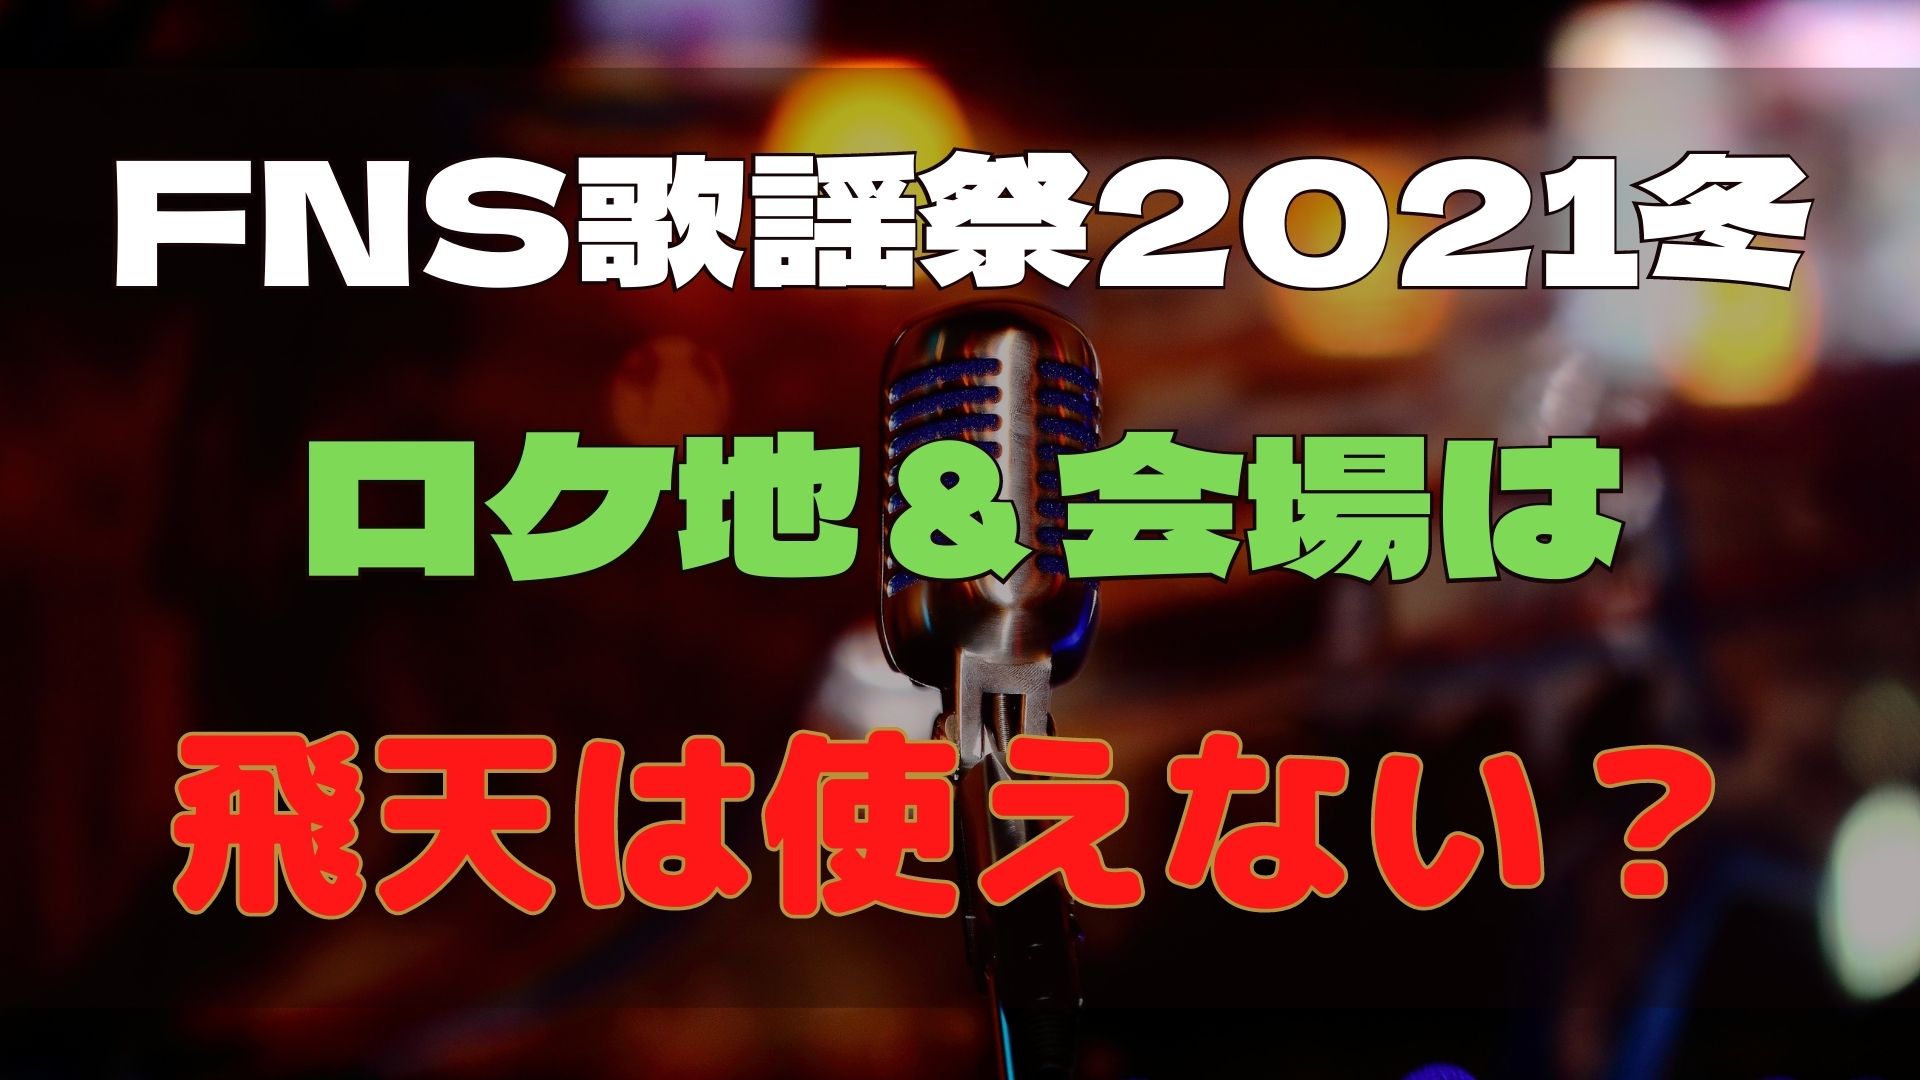 FNS歌謡祭2021冬　ロケ地　会場　飛天